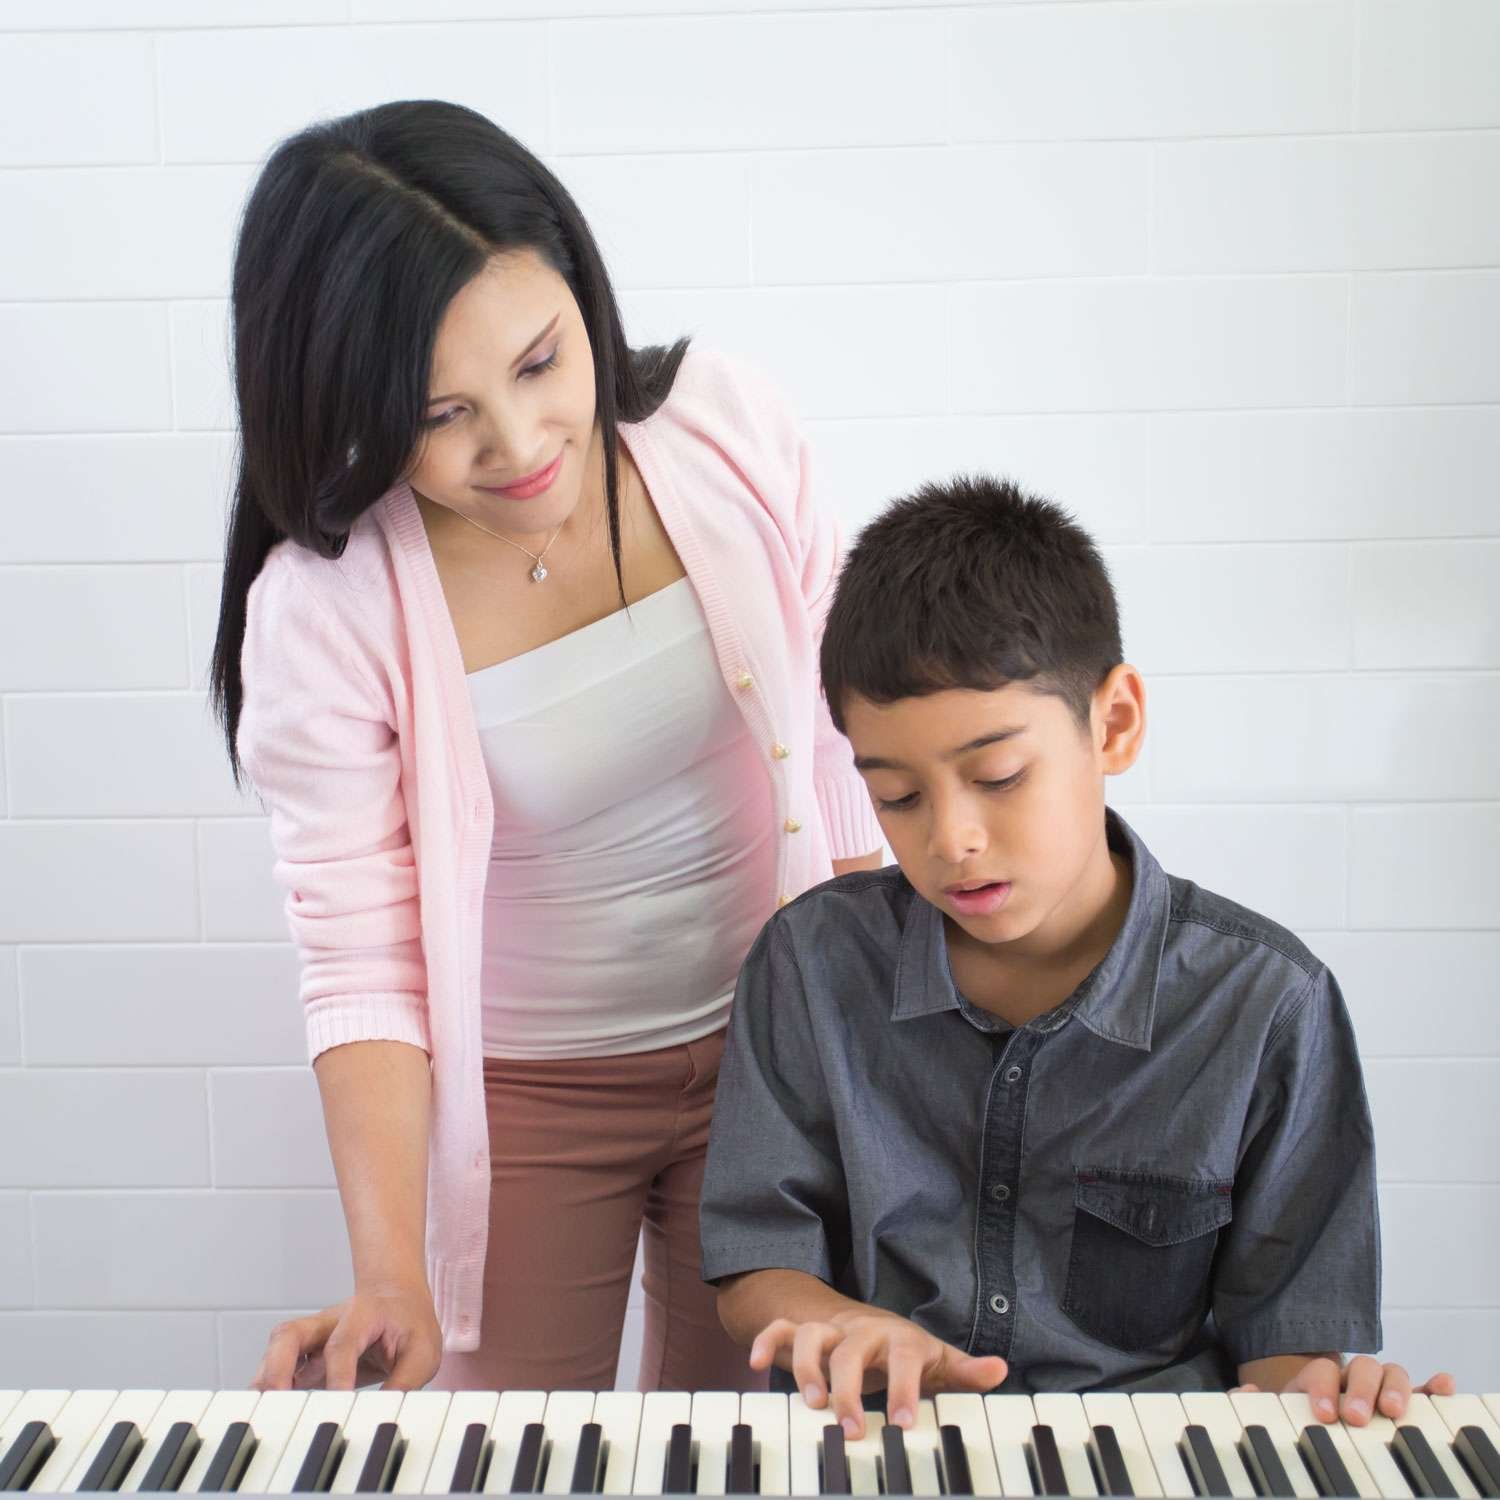 keyboard instructor and her student having a lesson